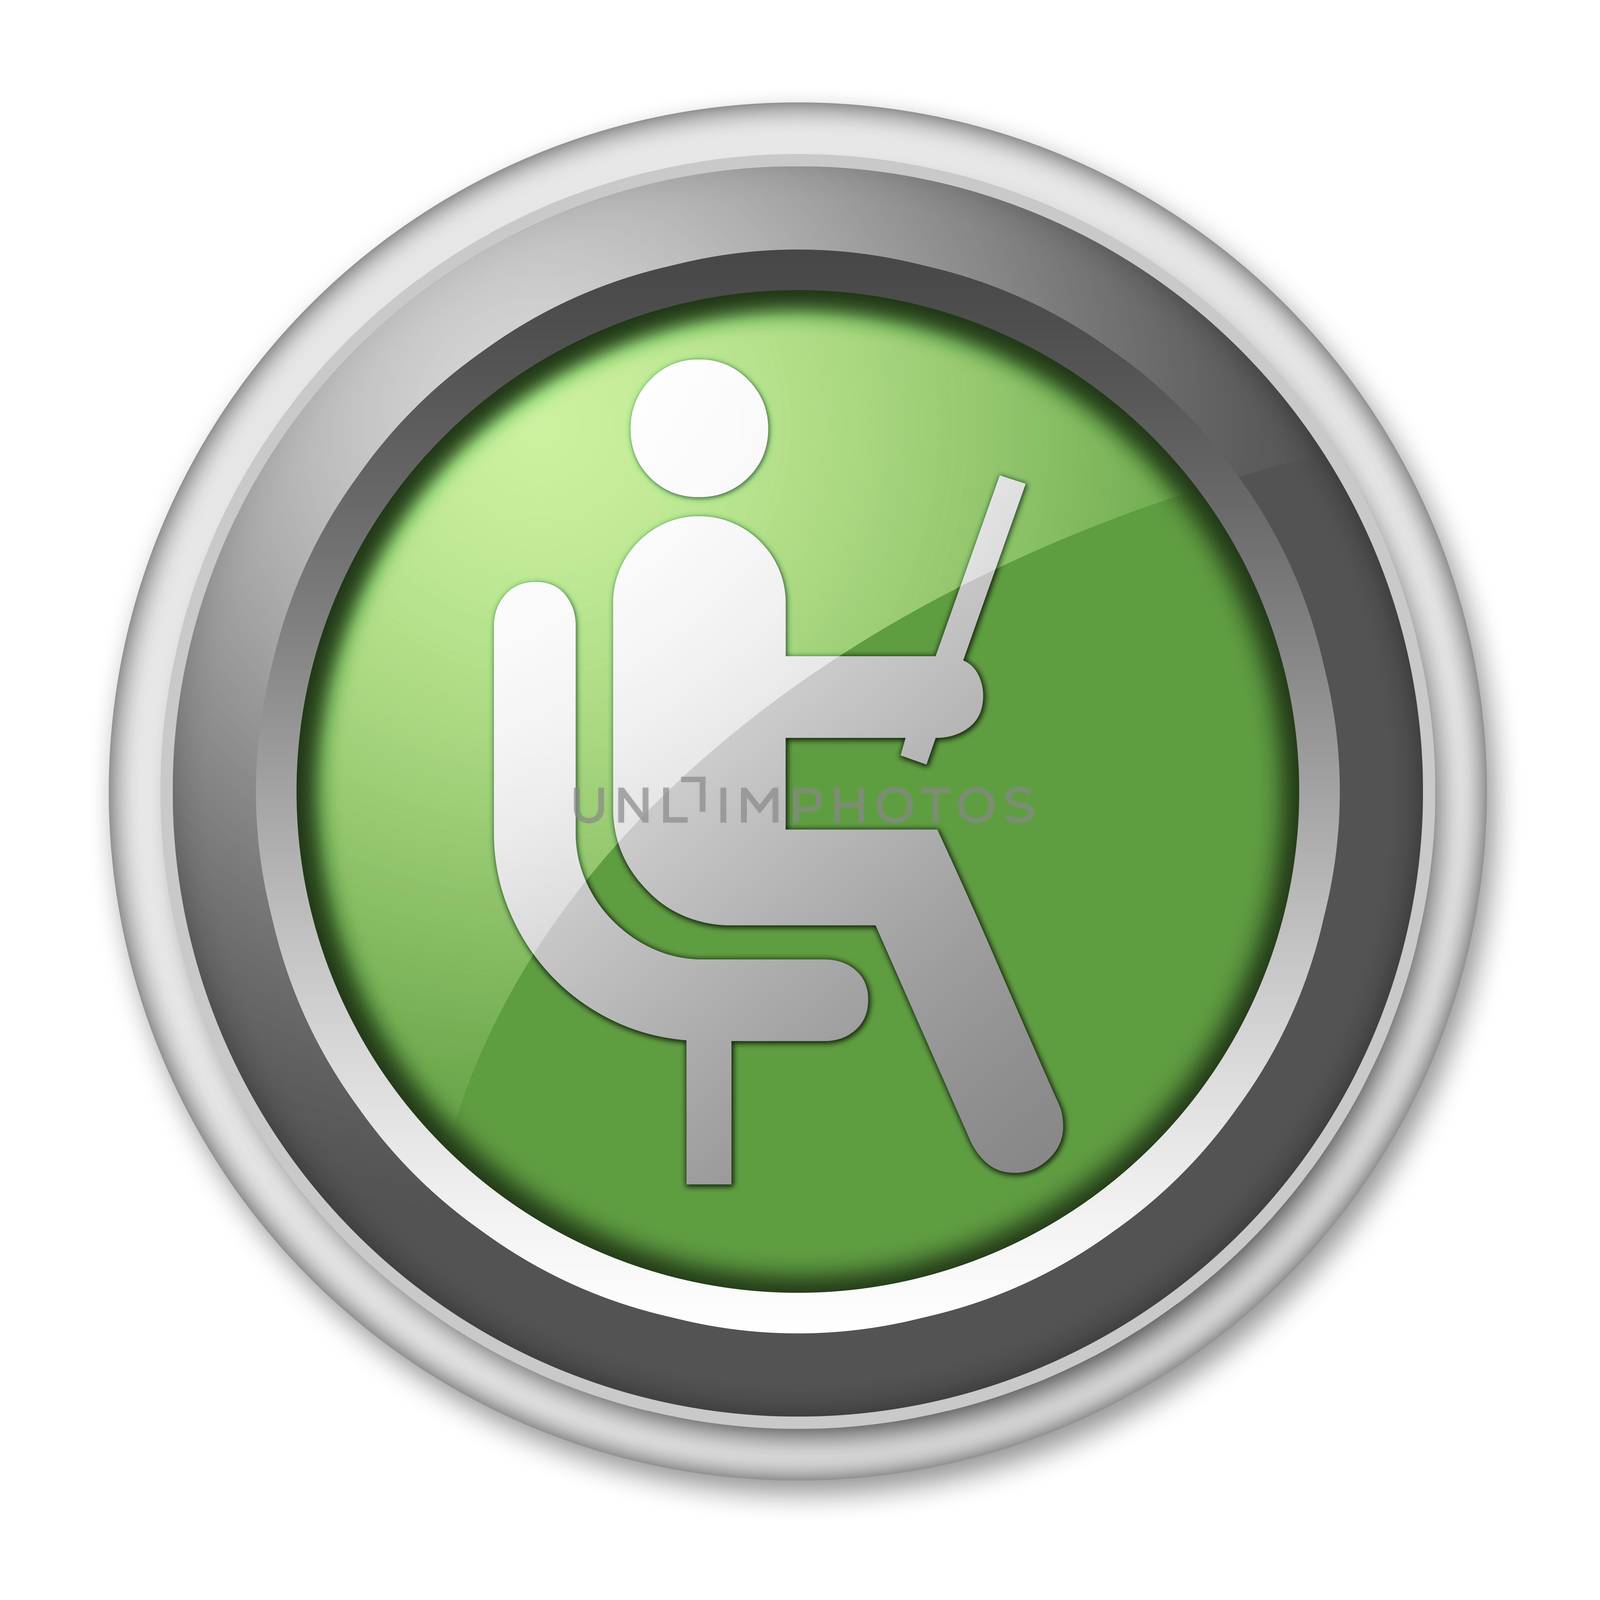 Icon, Button, Pictogram Waiting Room by mindscanner